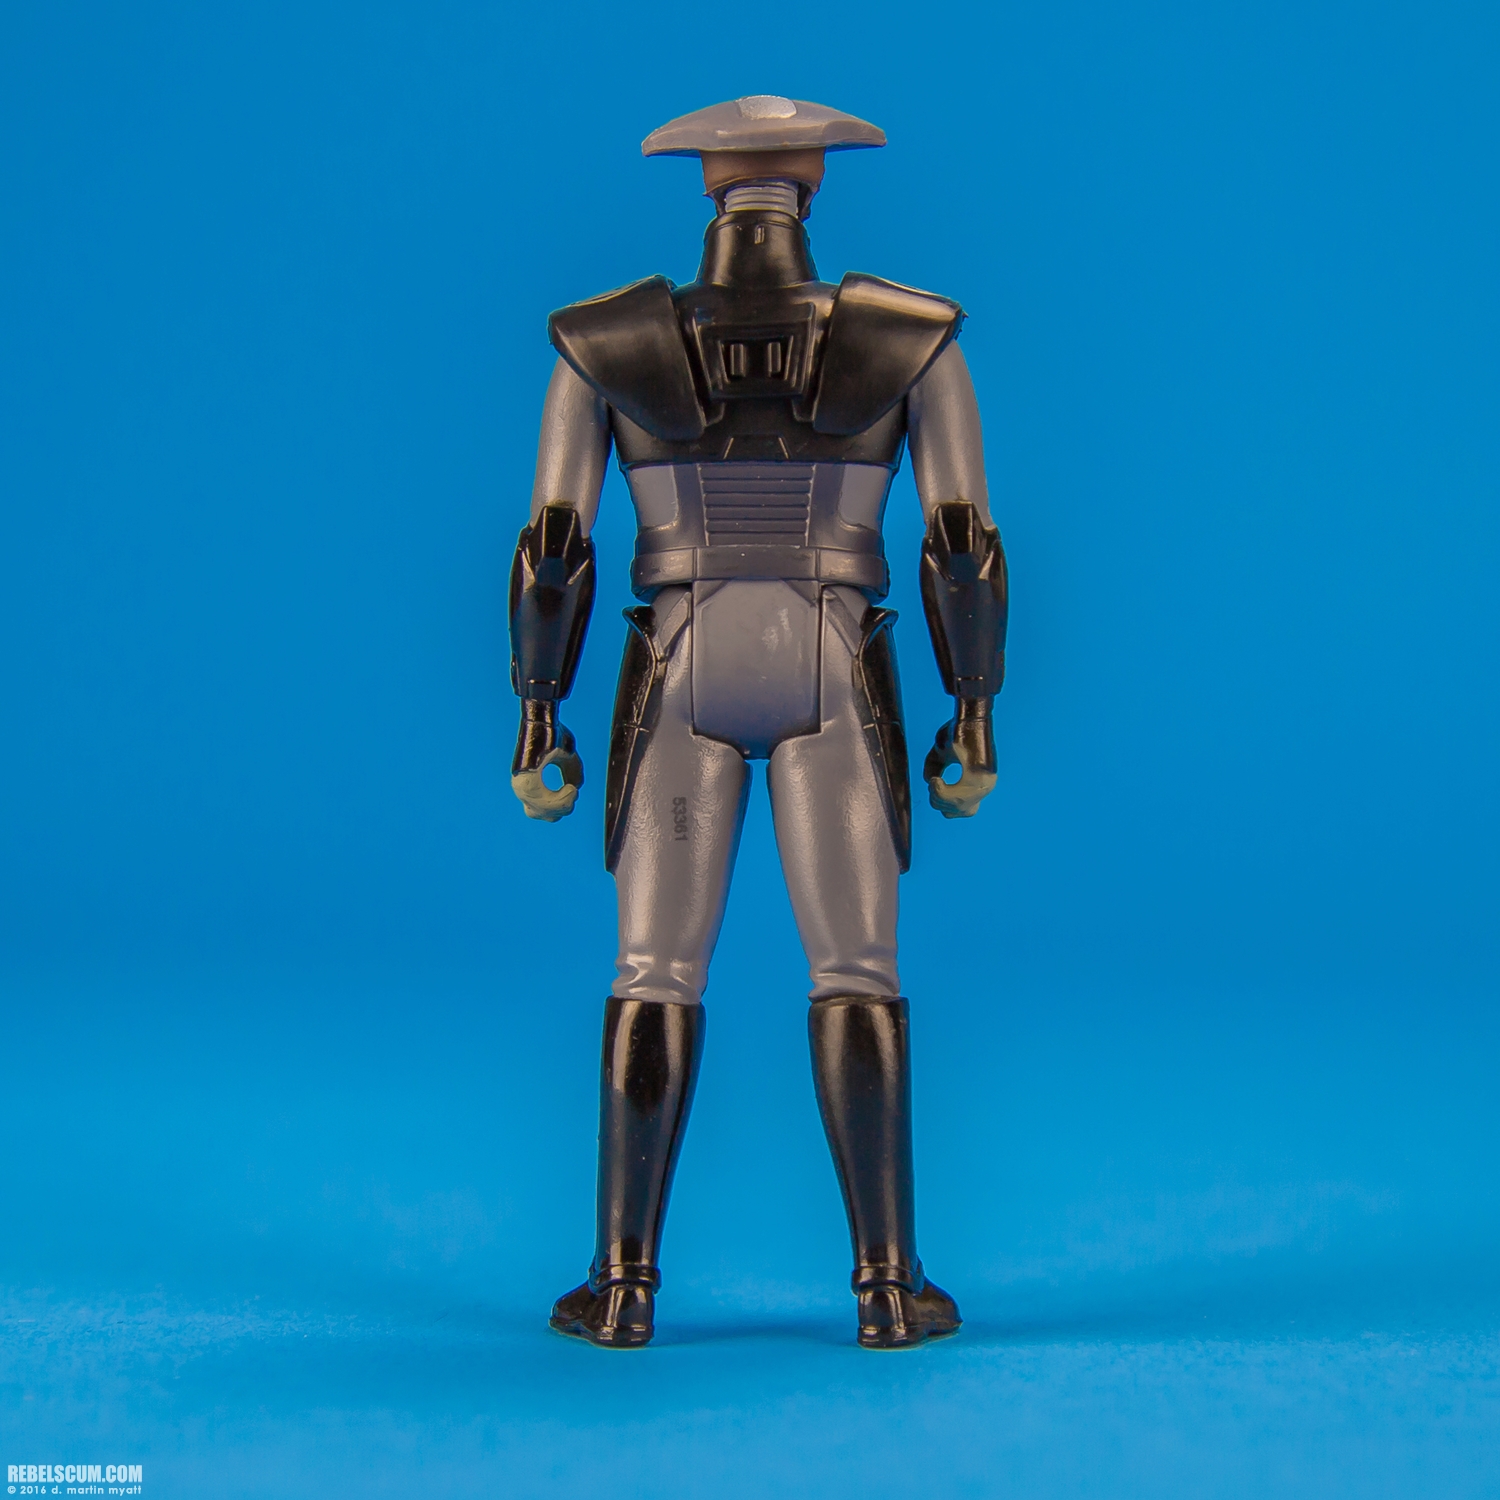 Fifth-Brother-Imperial-Inquisitor-The-Force-Awakens-Hasbro-004.jpg